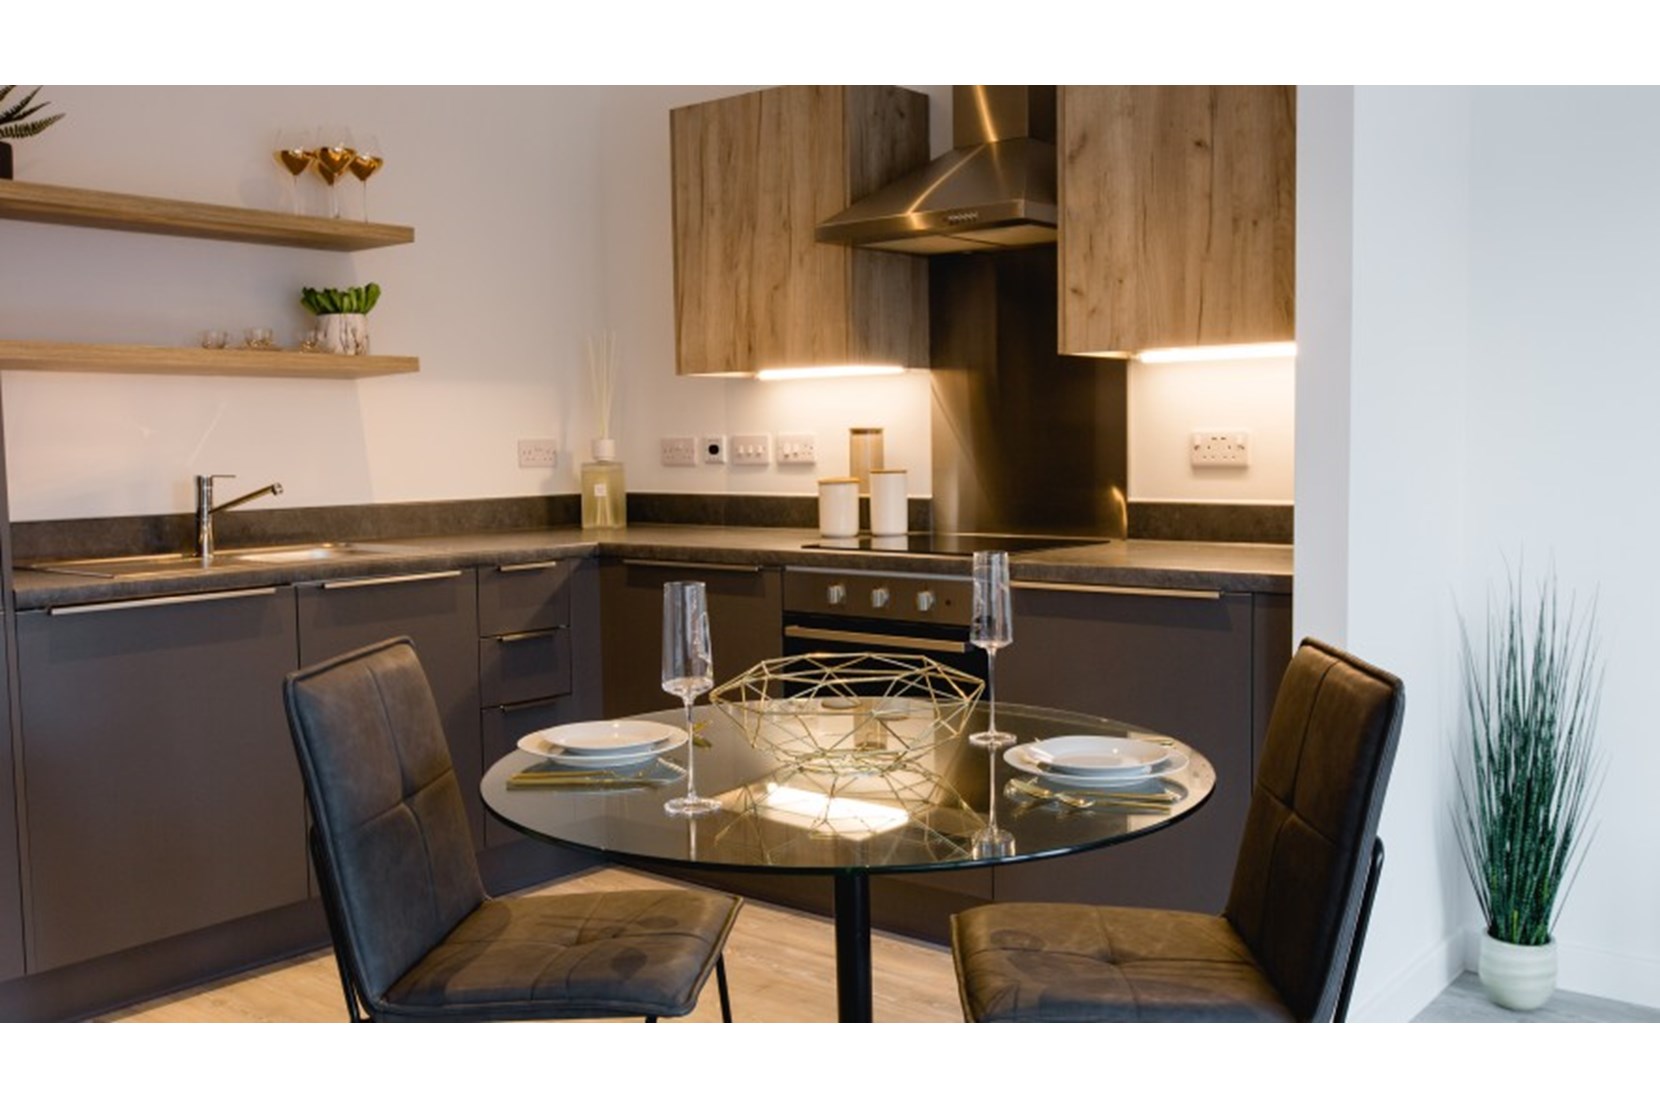 Apartments to Rent by Allsop at Vox, Manchester, M15, kitchen dining area